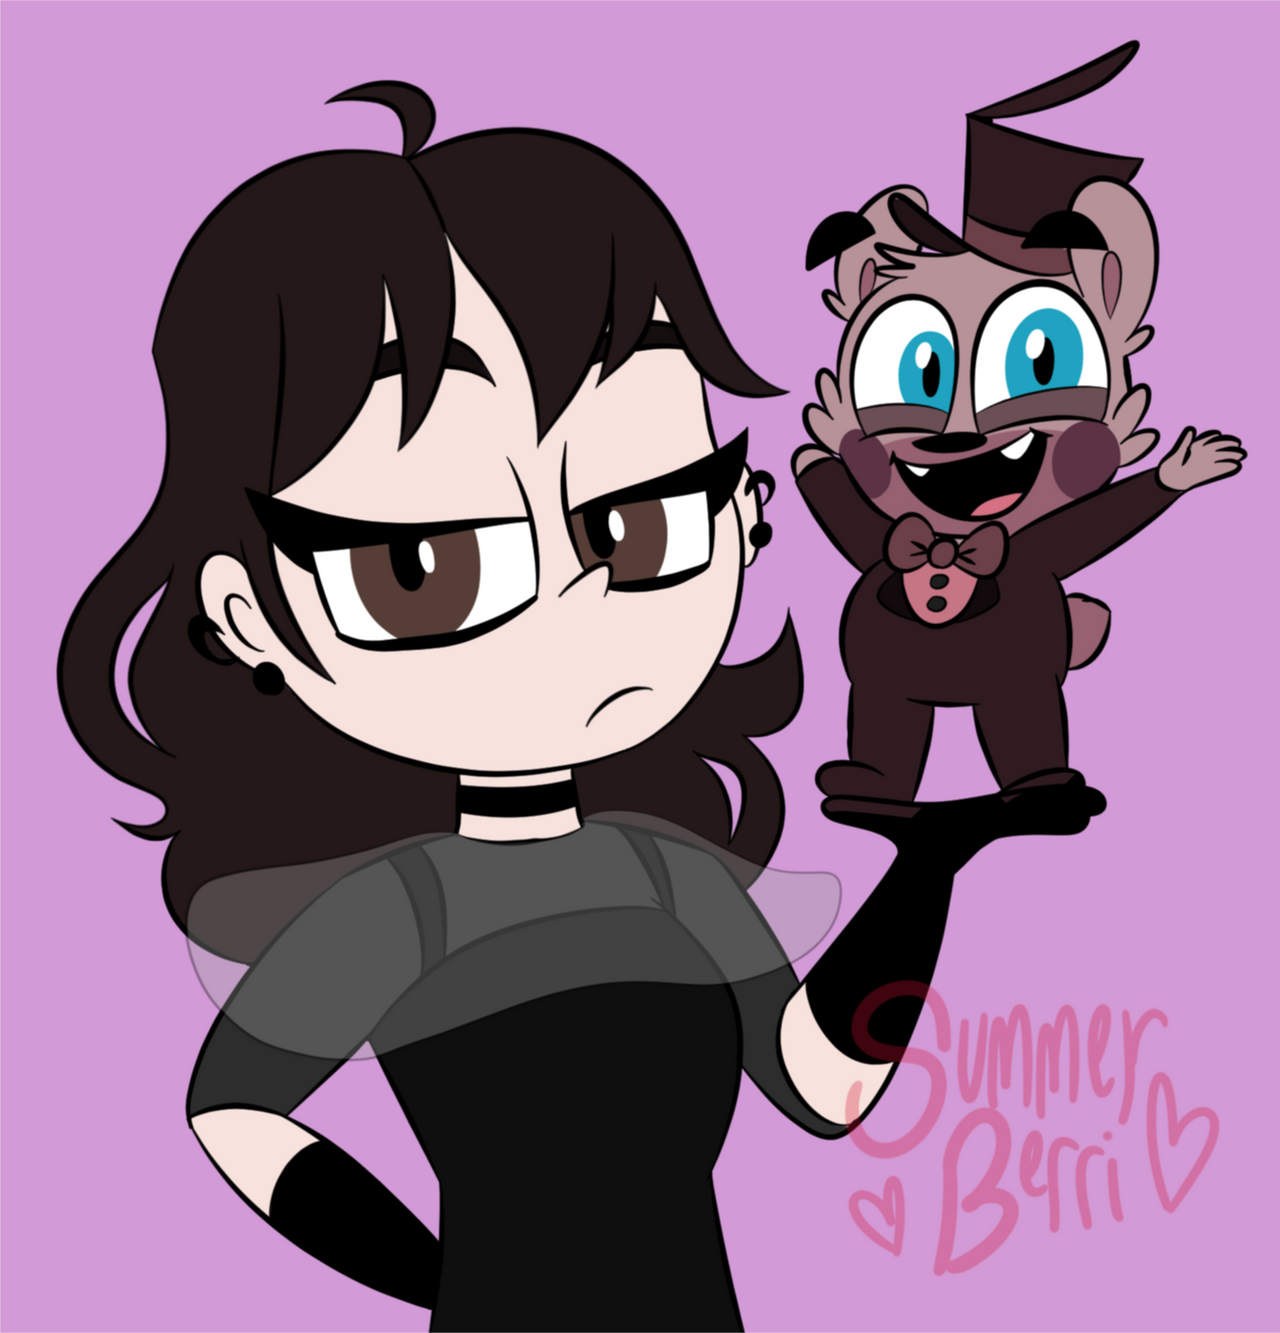 Ctw Millie And Baby Ft Freddy By Summerberribear On Deviantart